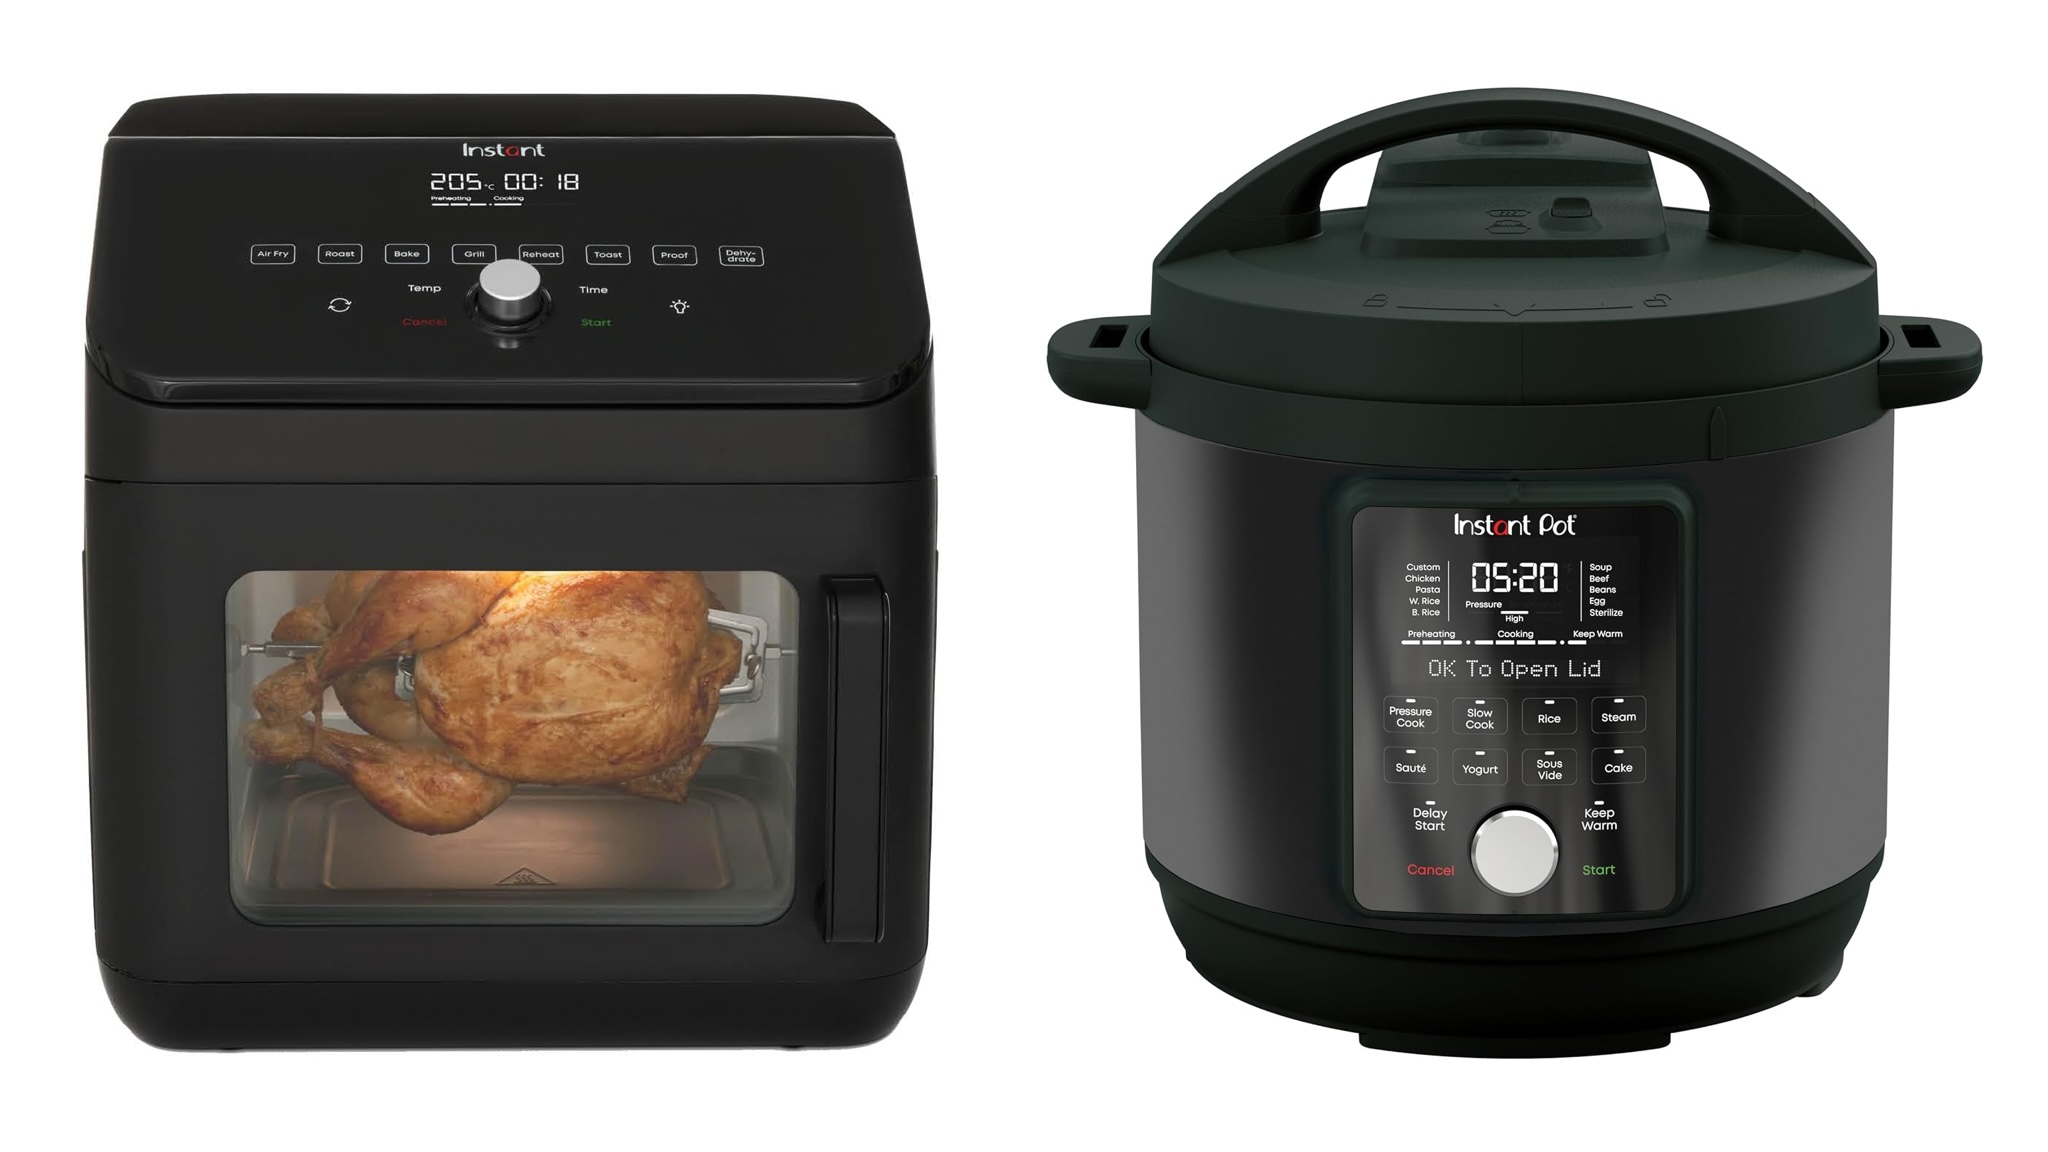 Instant Pot vs Air Fryer: Which one is better? - Corrie Cooks